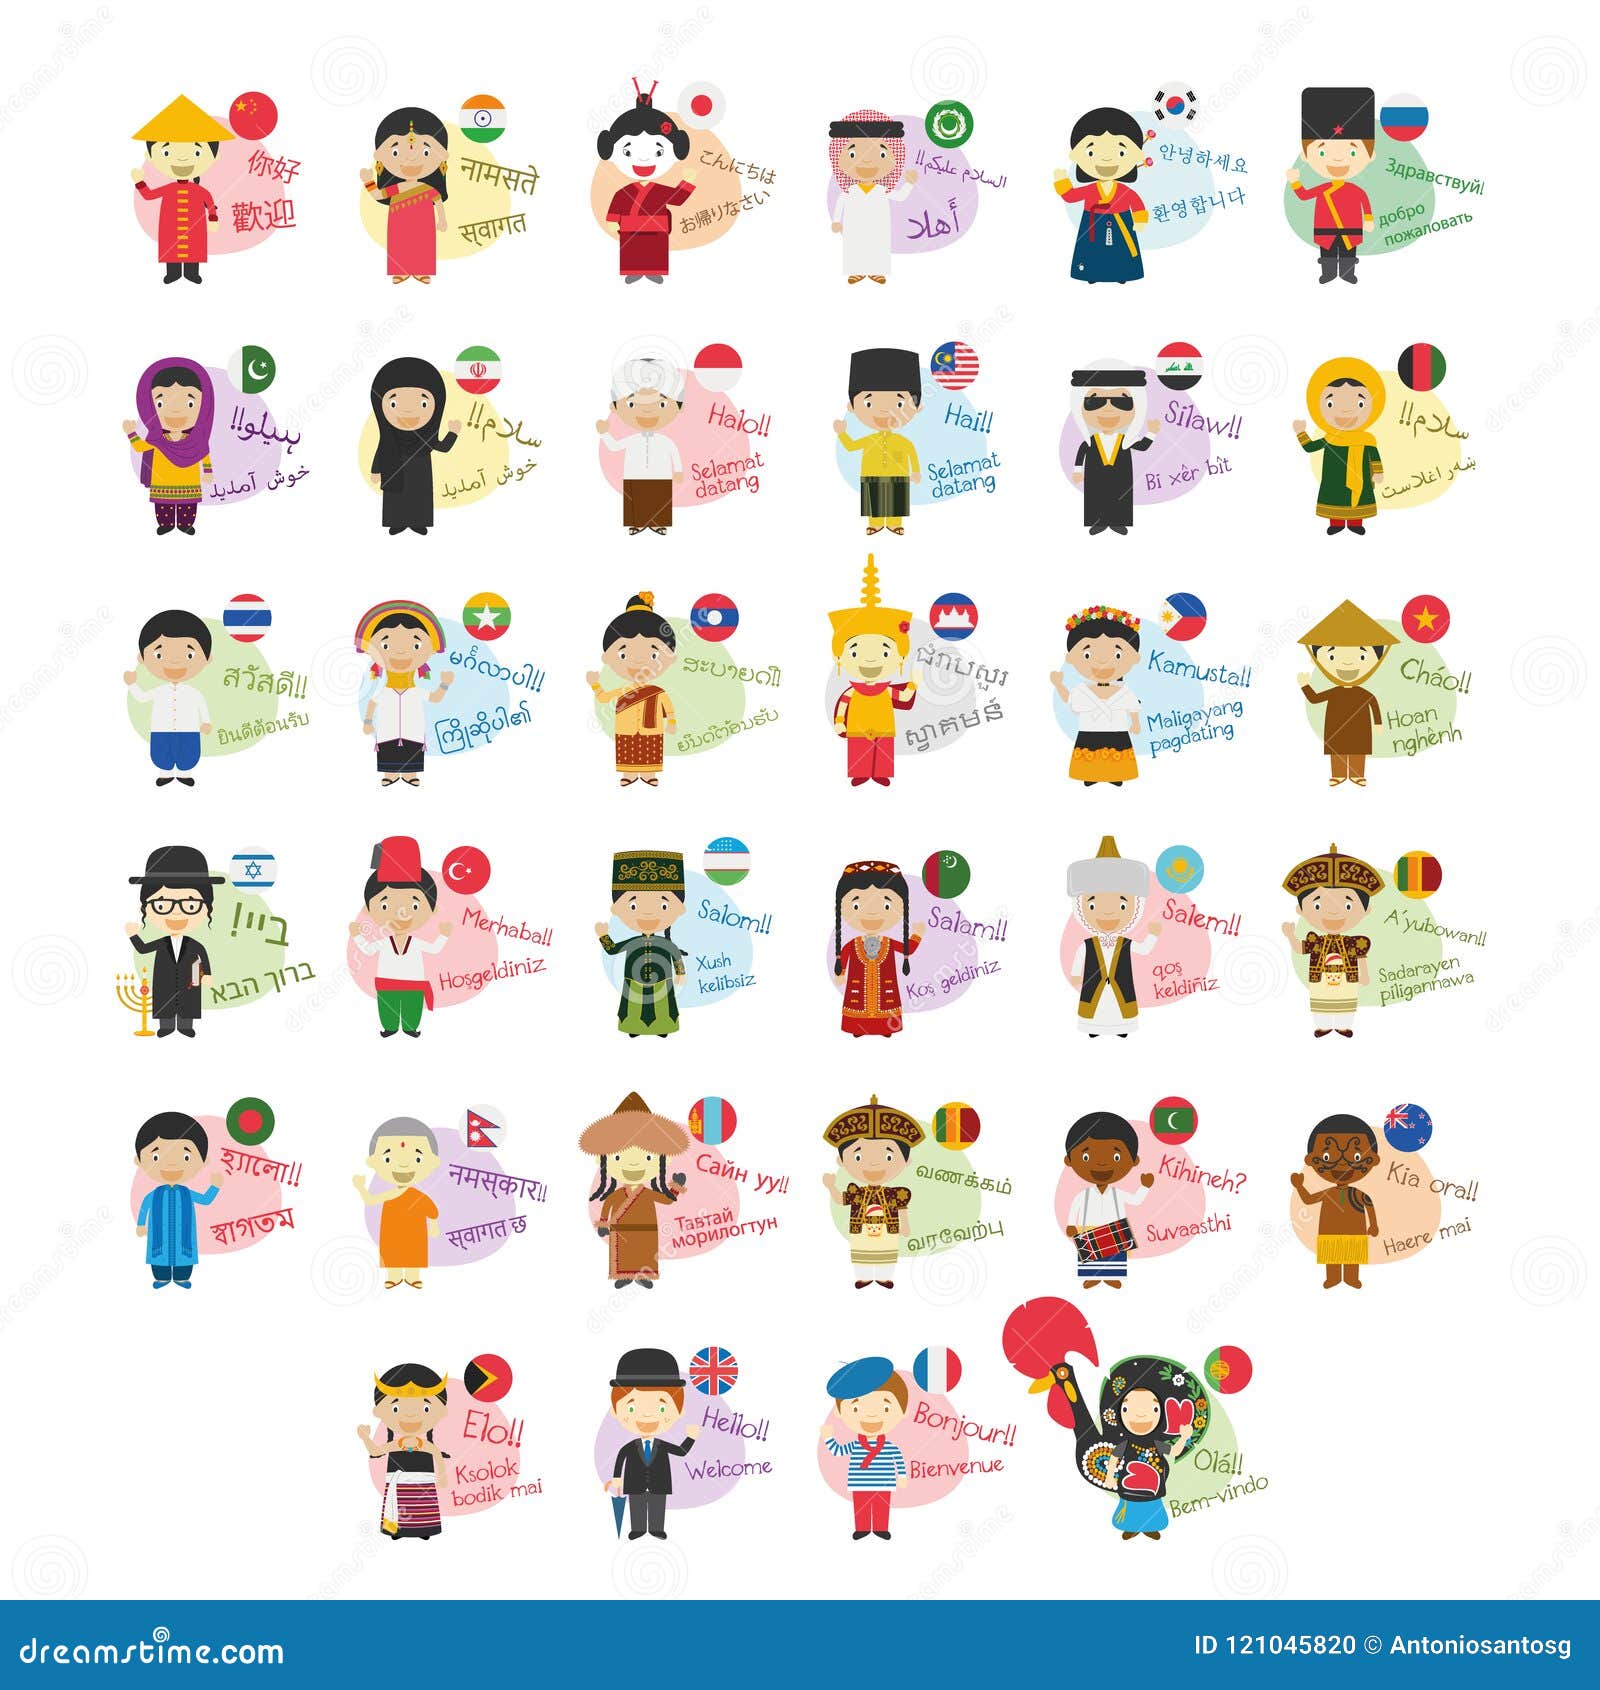 set of cartoon characters saying hello and welcome in 34 languages spoken in asia and oceania